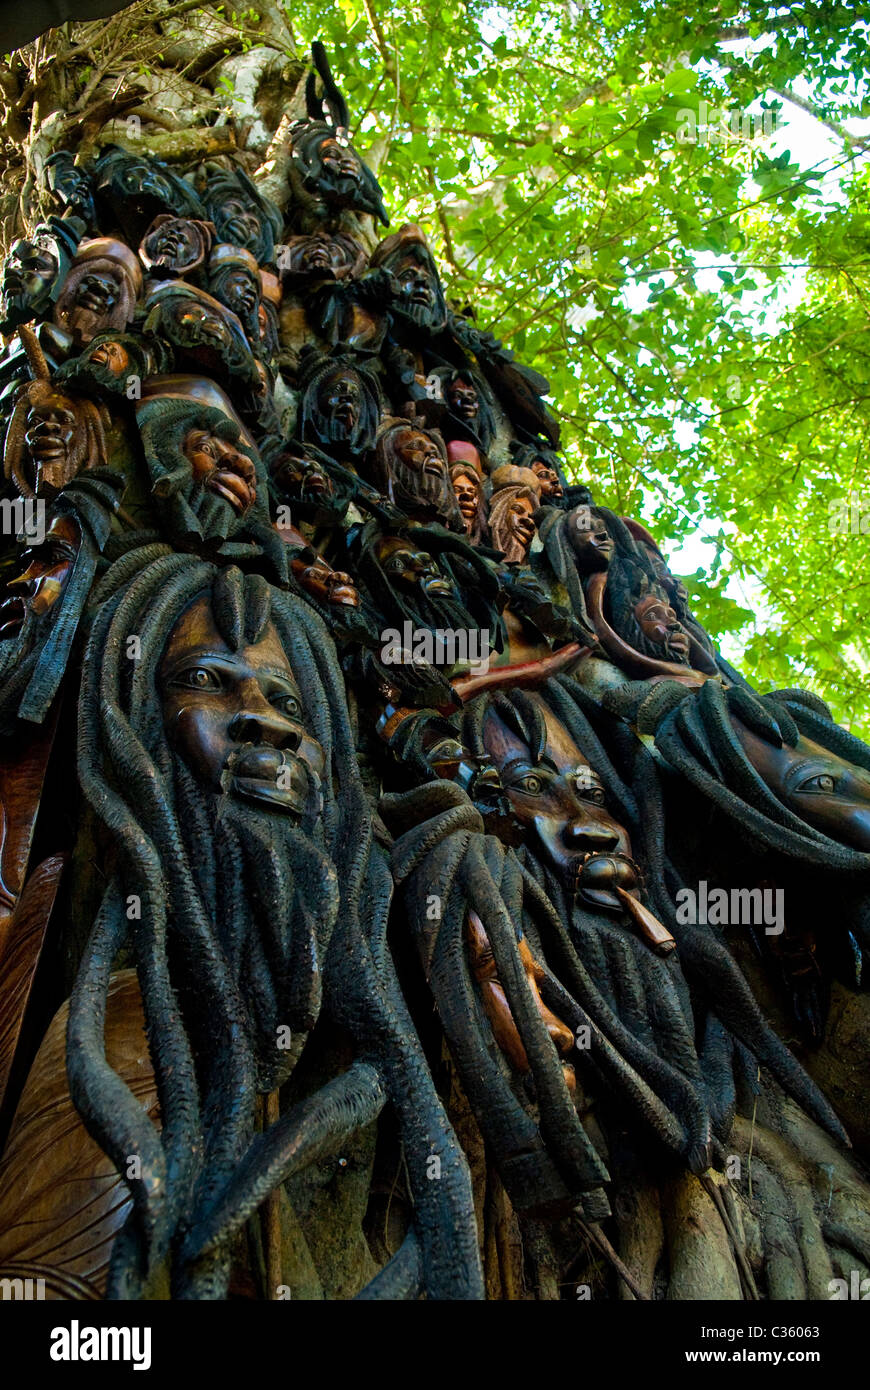 Wood carvings displayed on a tree at Dunn's River Falls, near Ocho Rios, St Ann, Jamaica Stock Photo